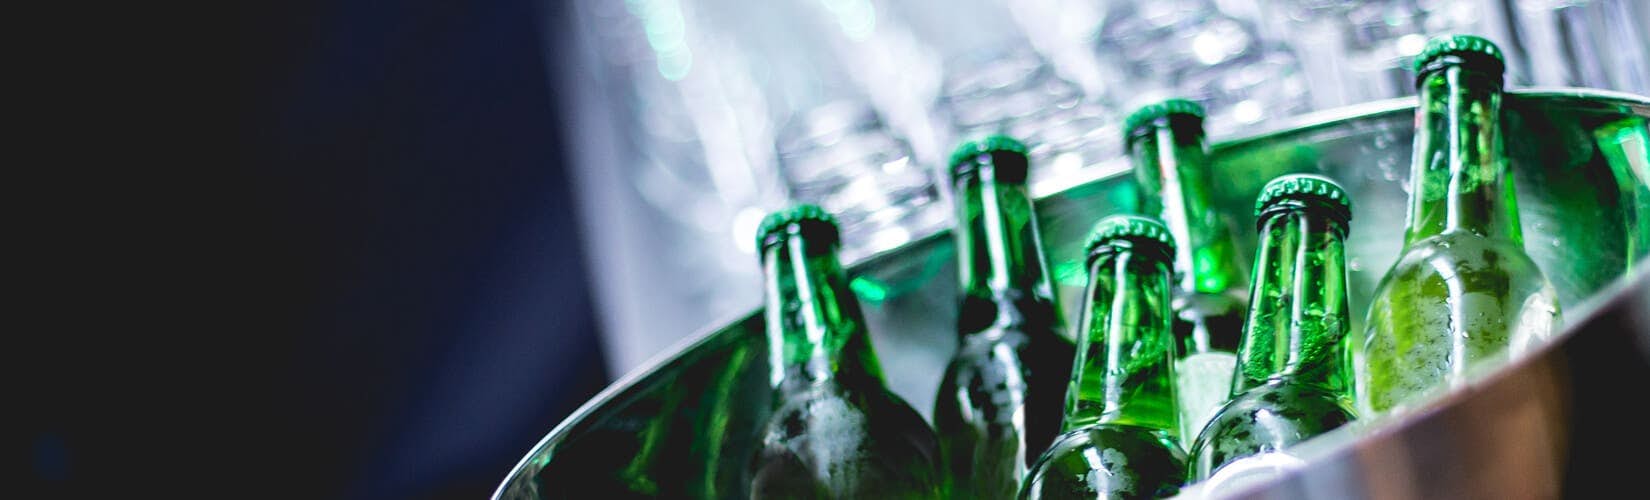 Exploding Beer Bottles And Cans: A New Wave Of Product Liability Litigation